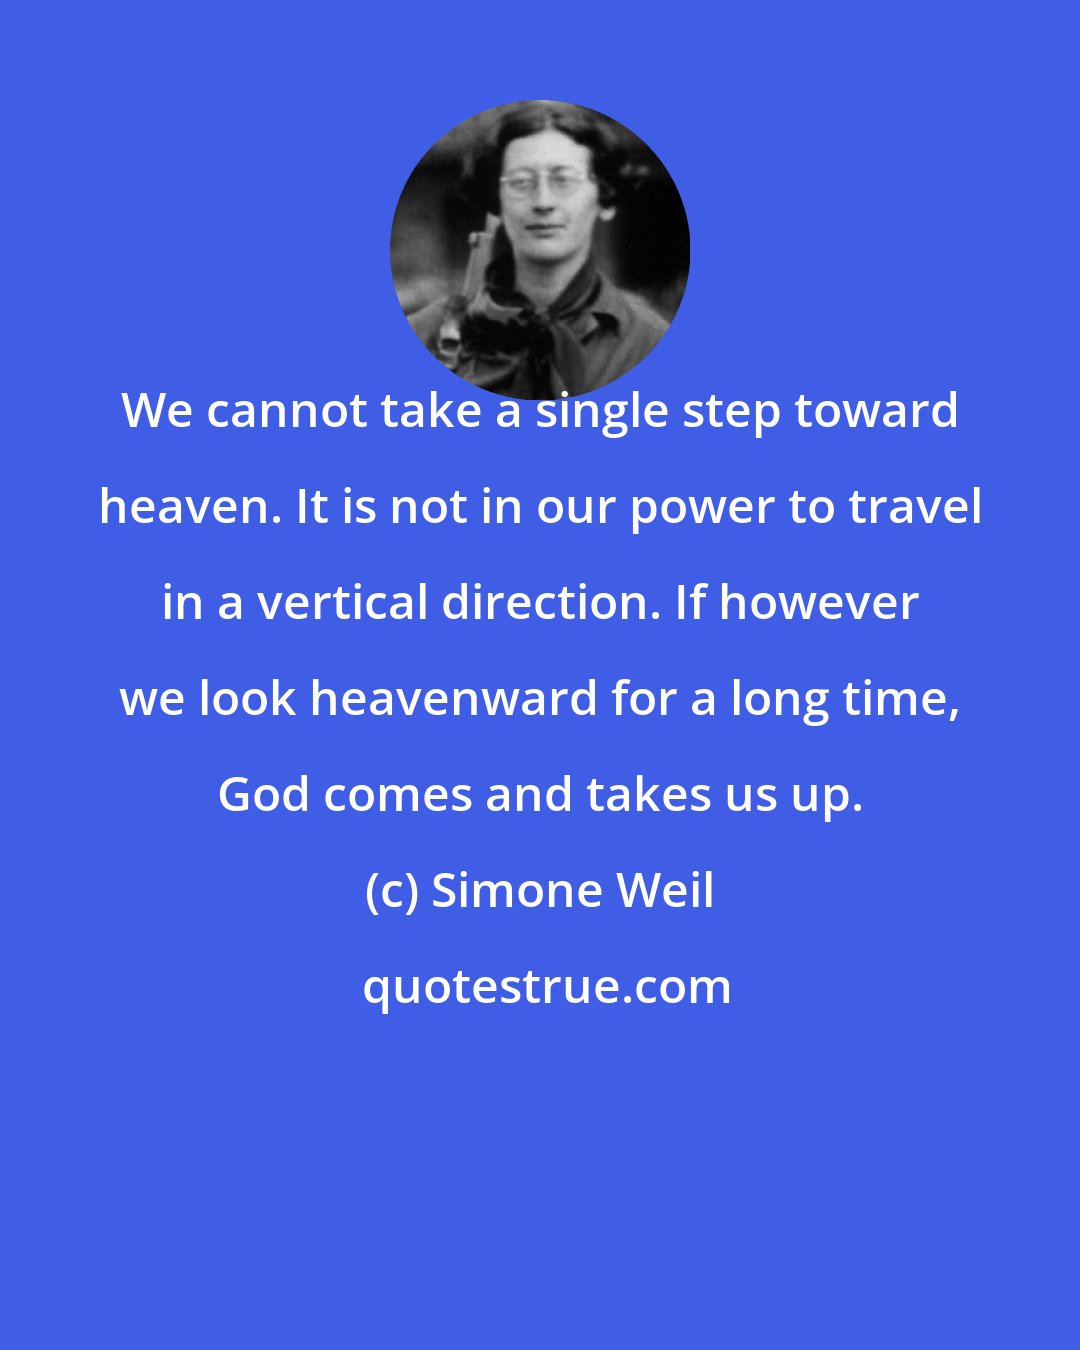 Simone Weil: We cannot take a single step toward heaven. It is not in our power to travel in a vertical direction. If however we look heavenward for a long time, God comes and takes us up.